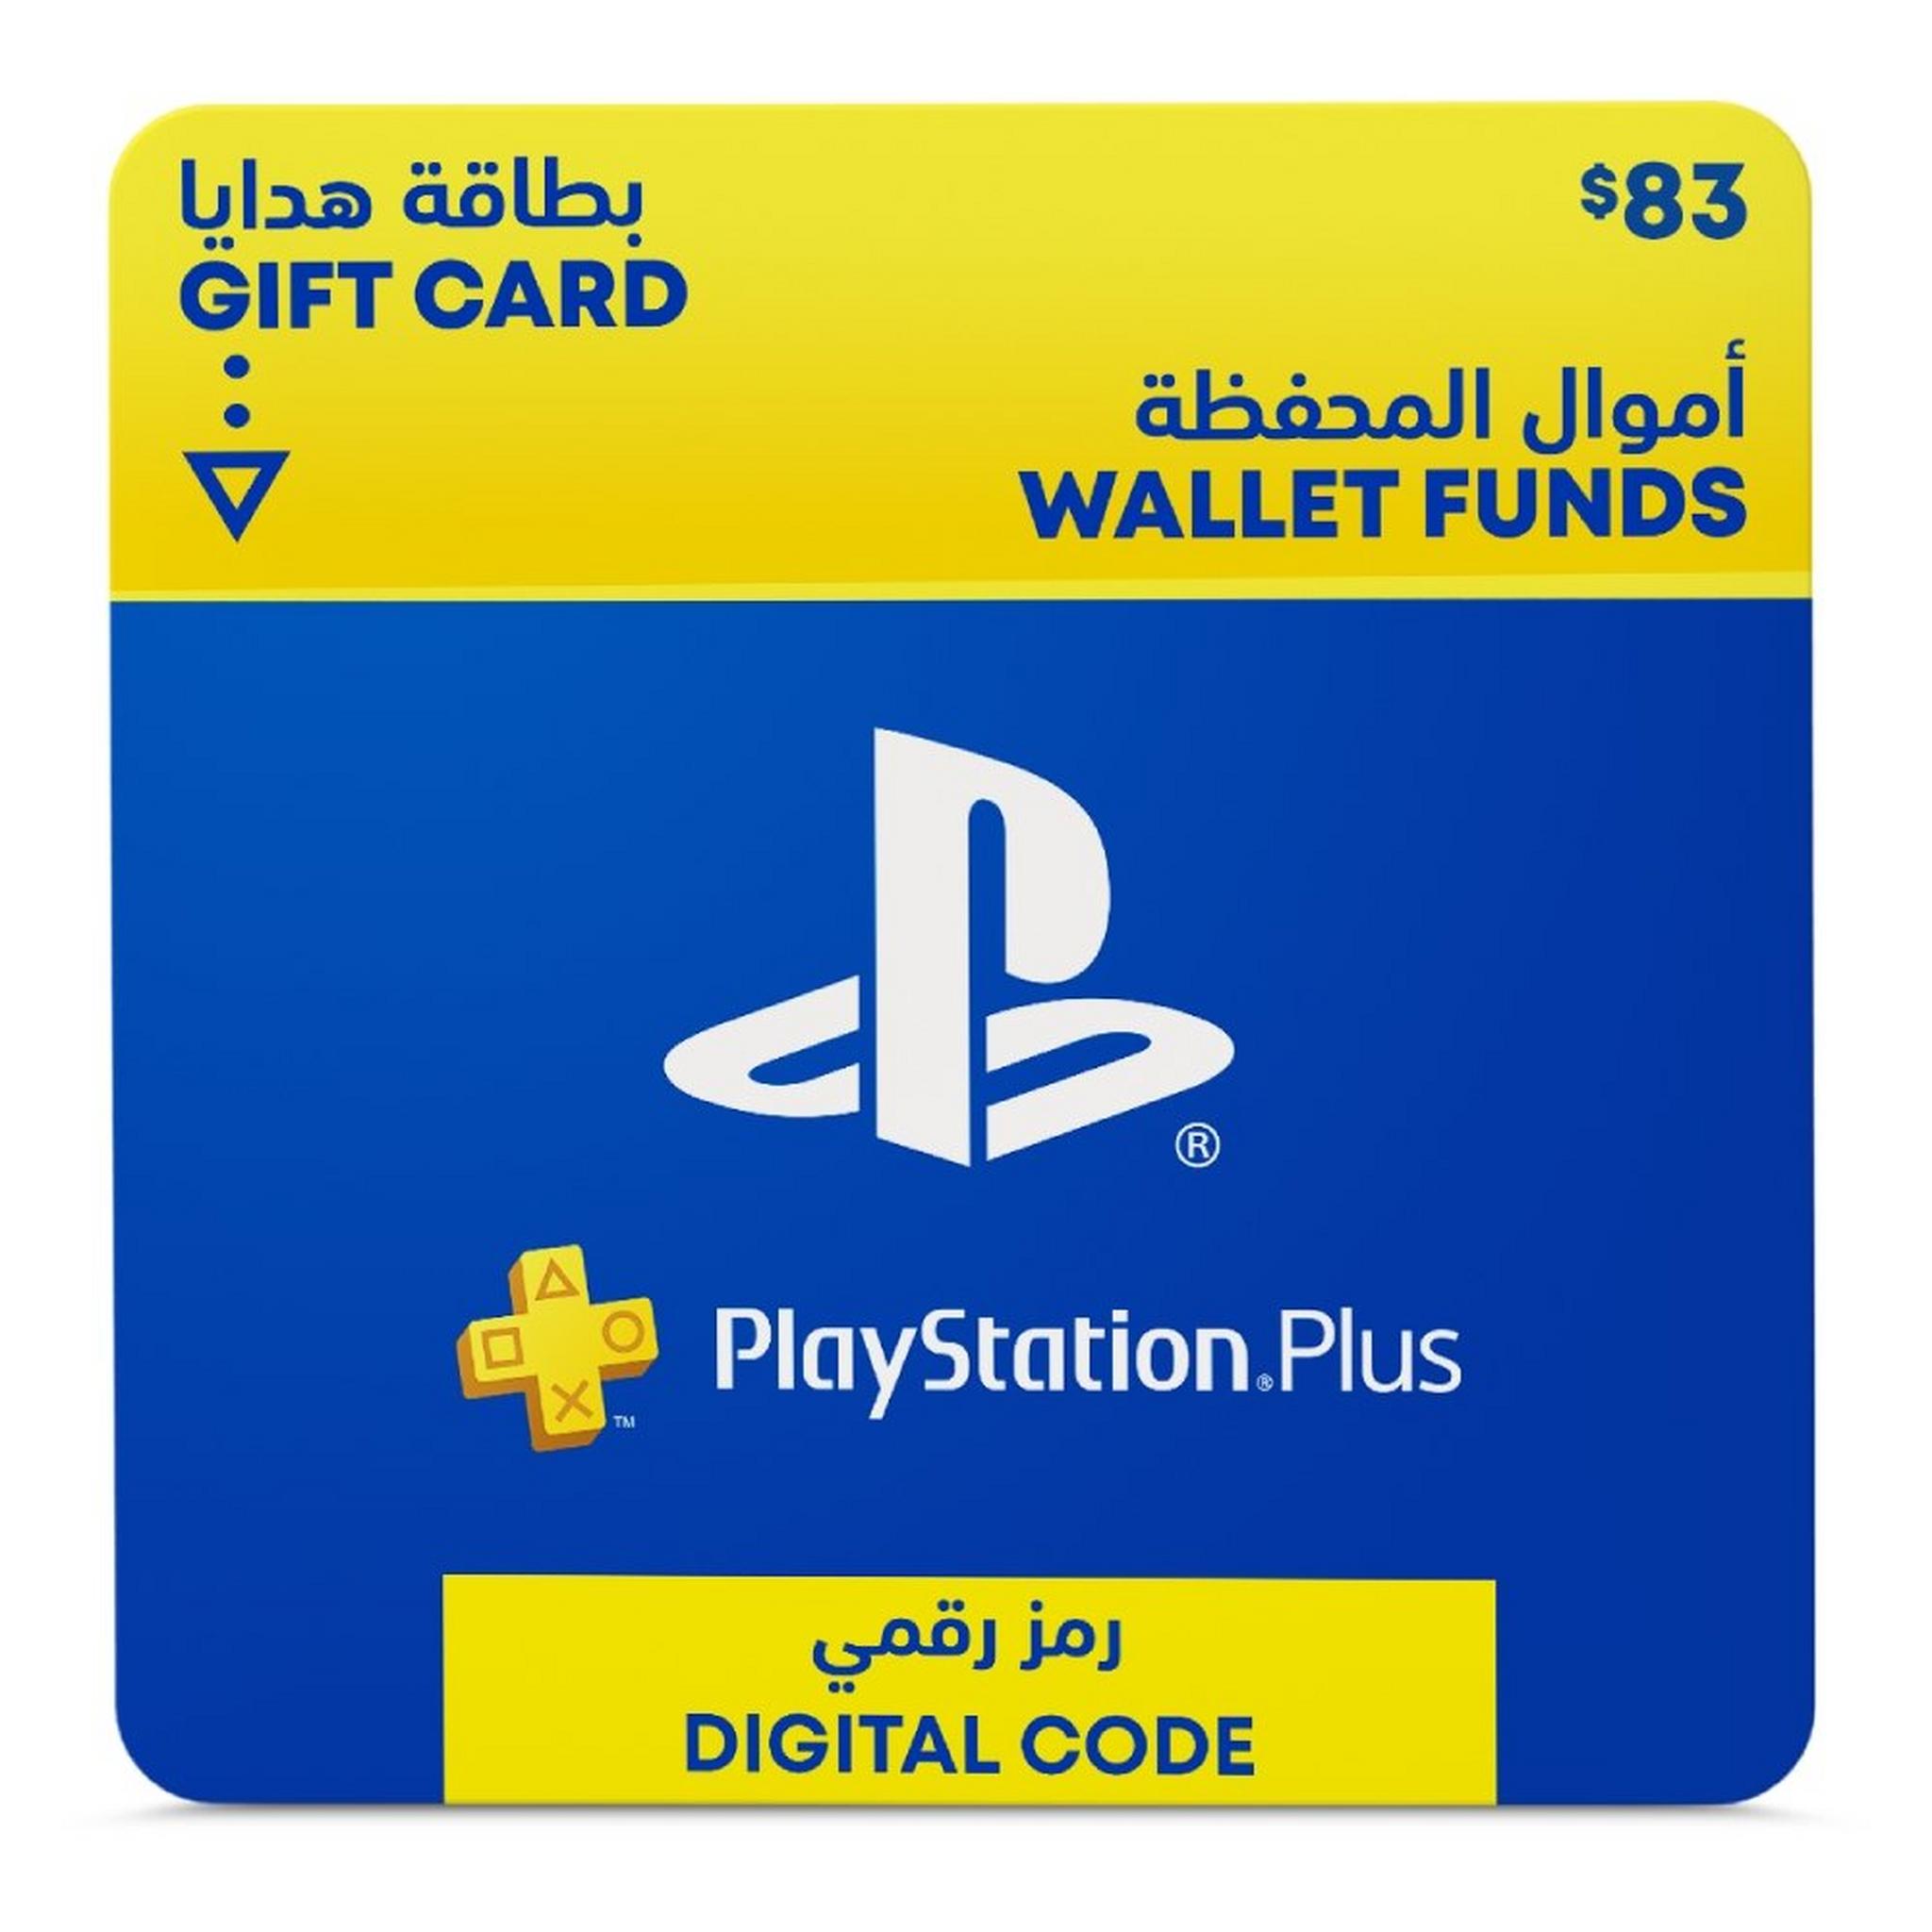 Sony PSN Wallet Fund Top UP - 83 USD